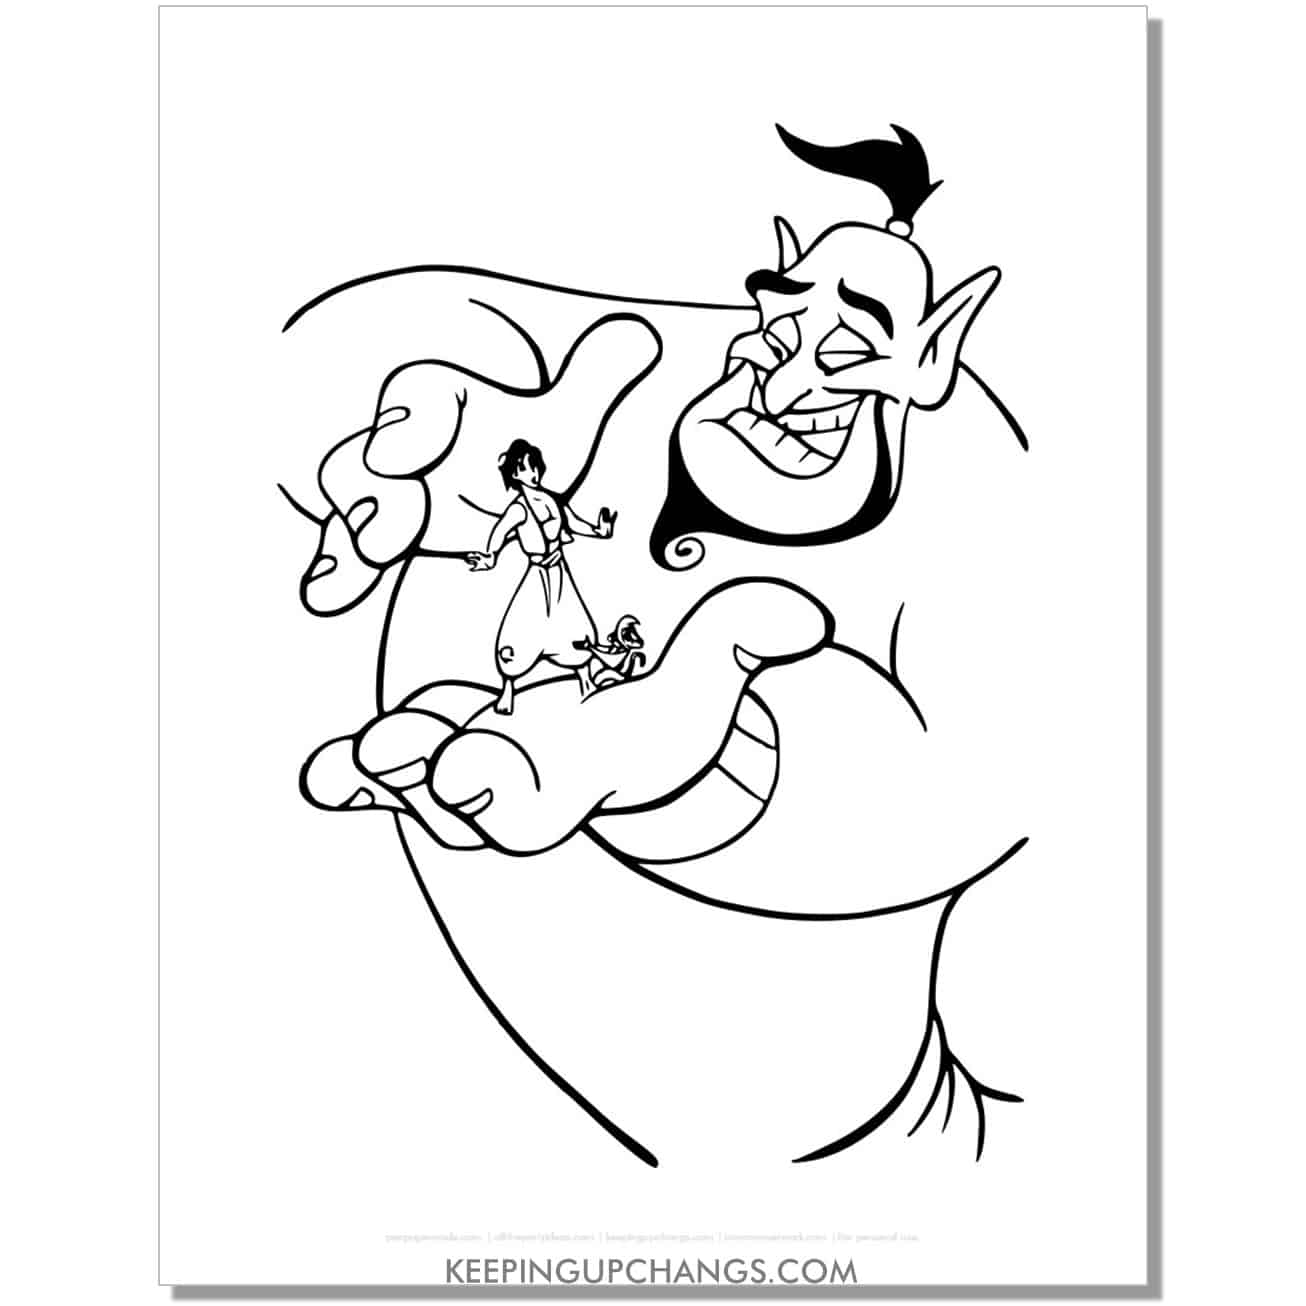 genie holding aladdin, abu in palm of hand coloring page, sheet.